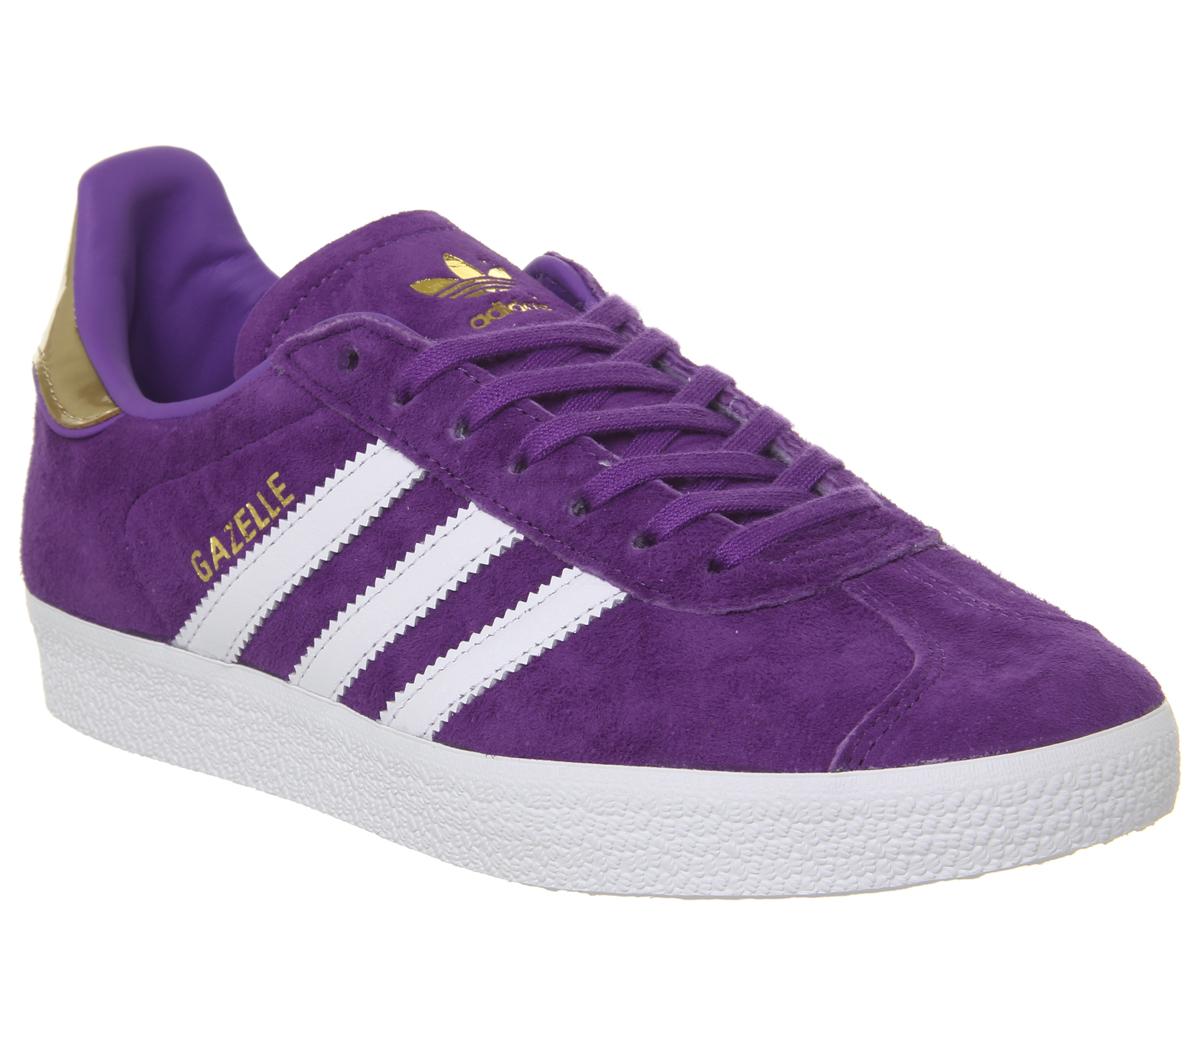 Adidas Originals TFL Gazelle Sneakers In Purple And White | lupon.gov.ph